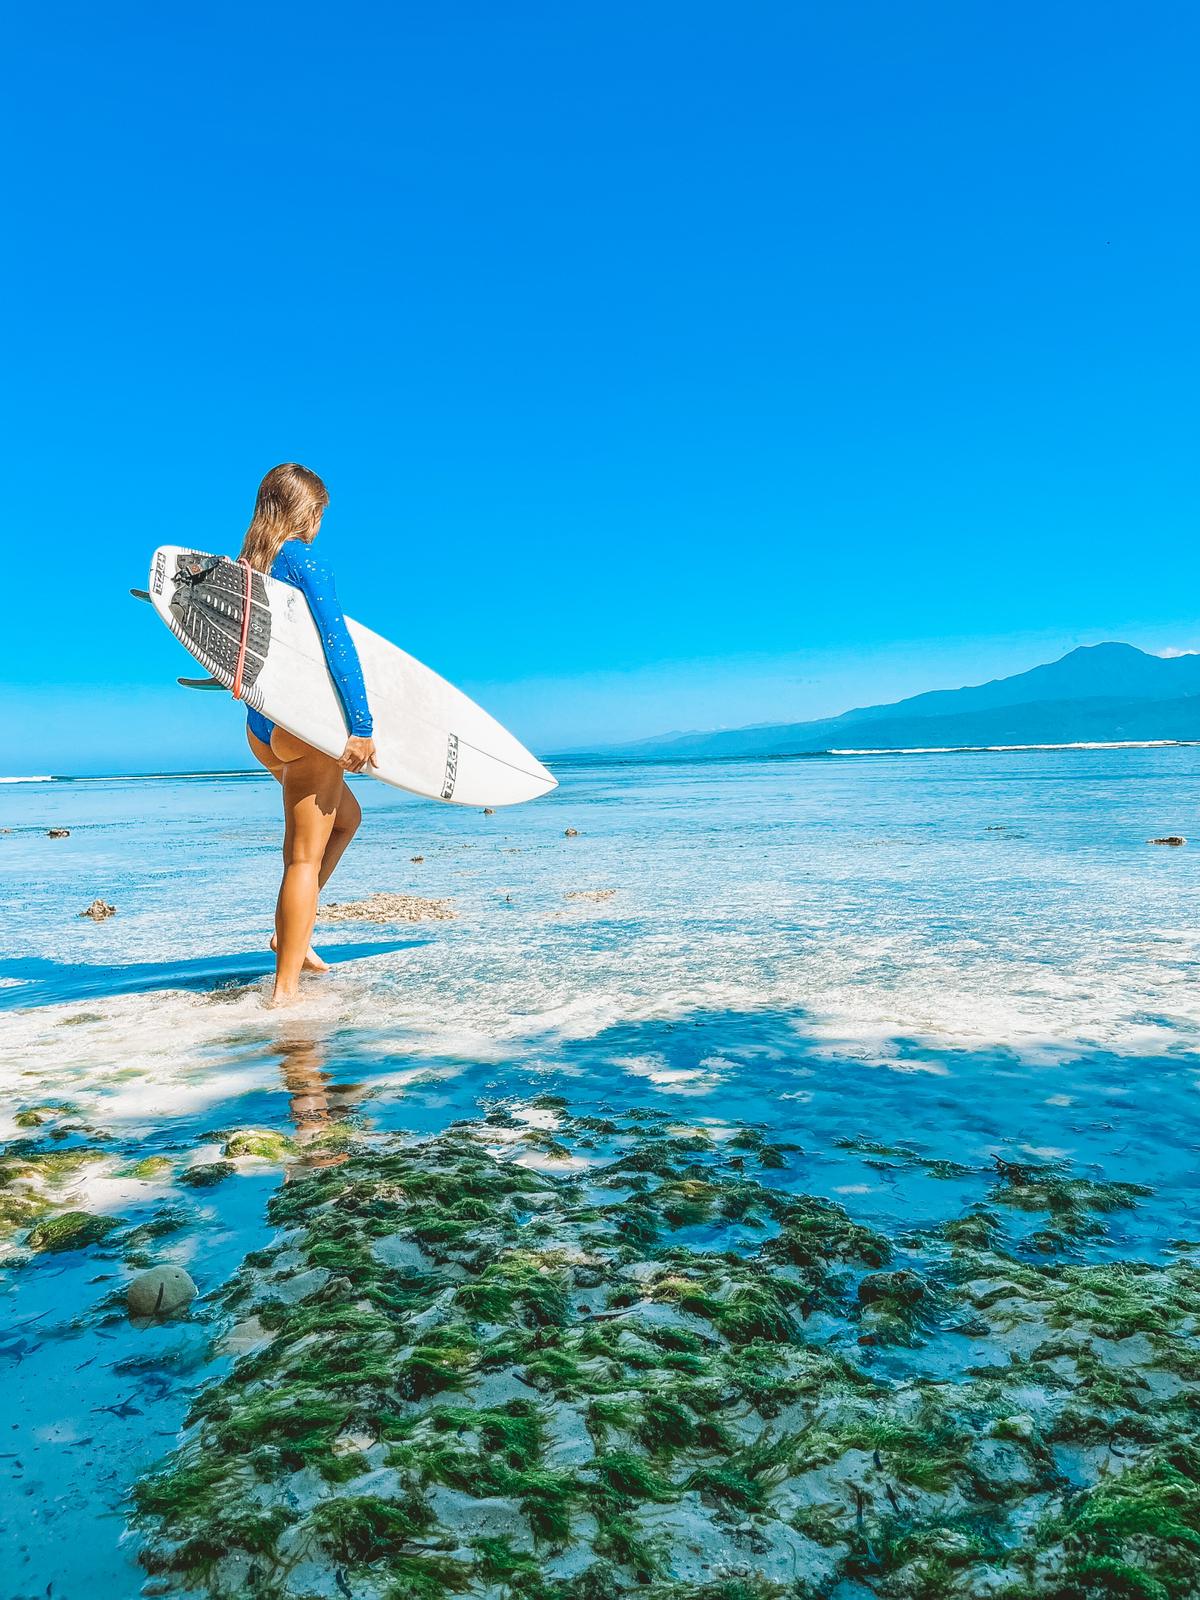 Piper, a beautiful surfer girl, standing in a blue ocean with her surfboard 